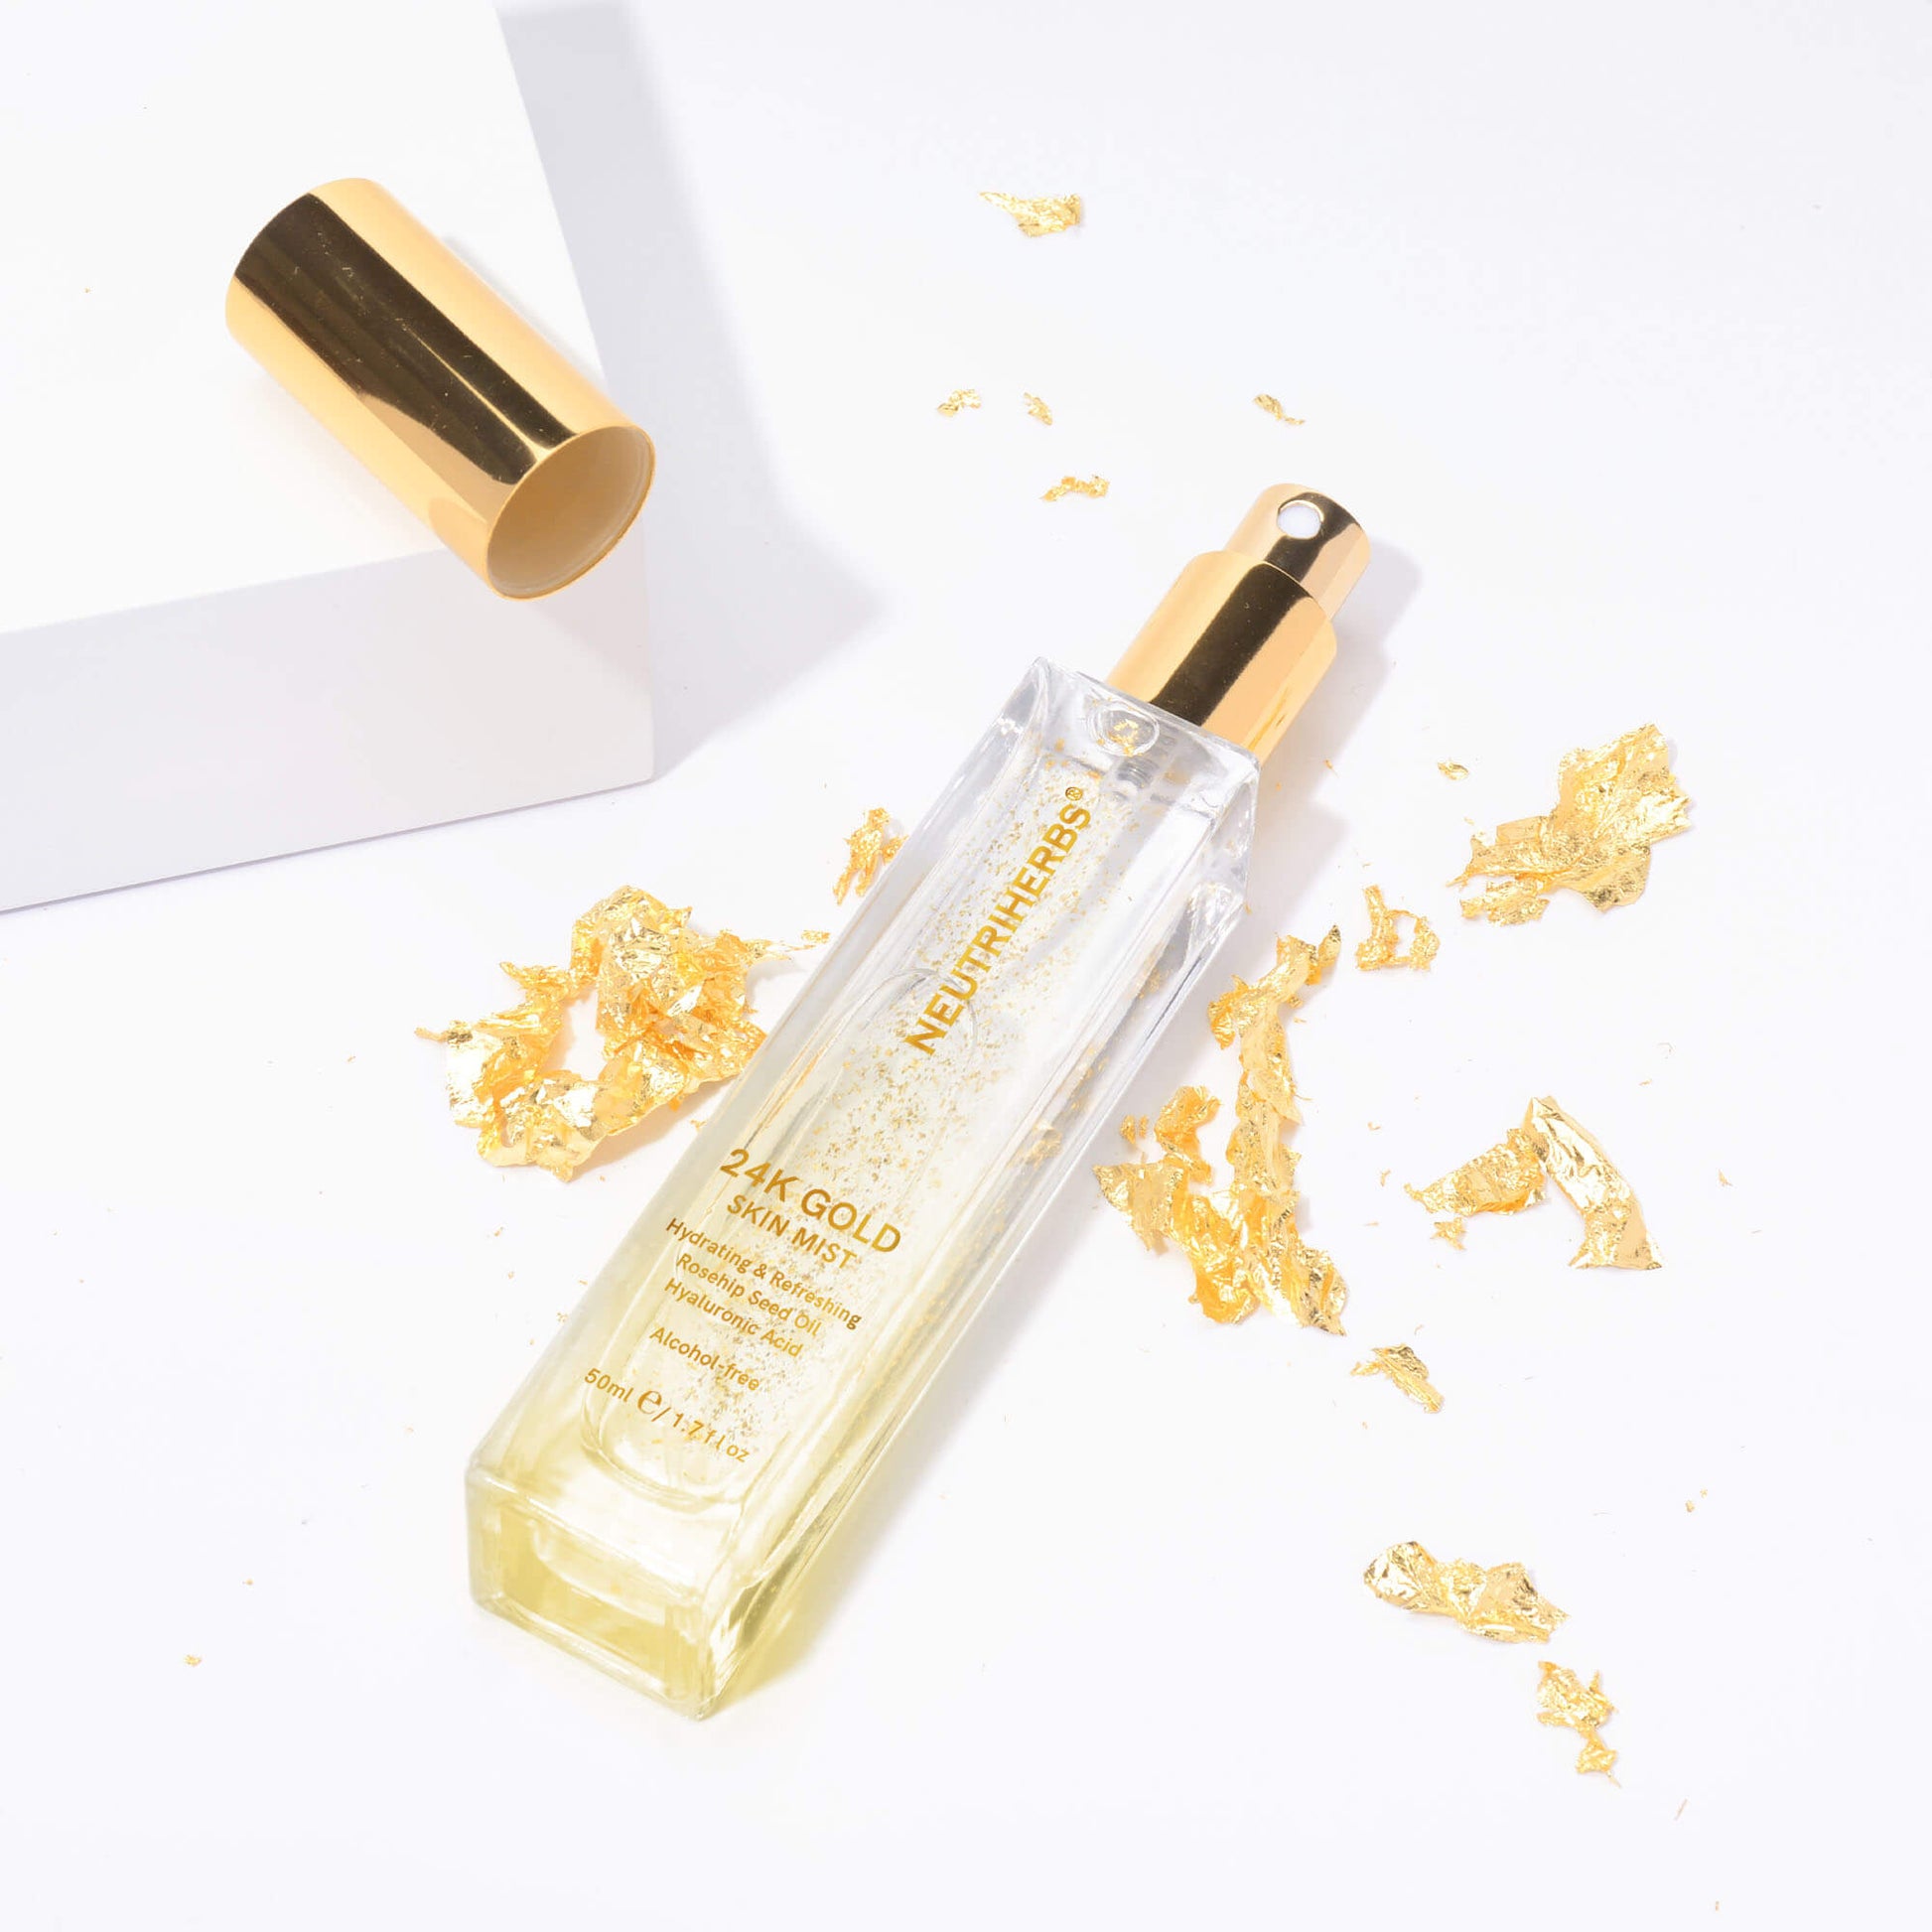 24K Gold Skin Mist-10 years private label service